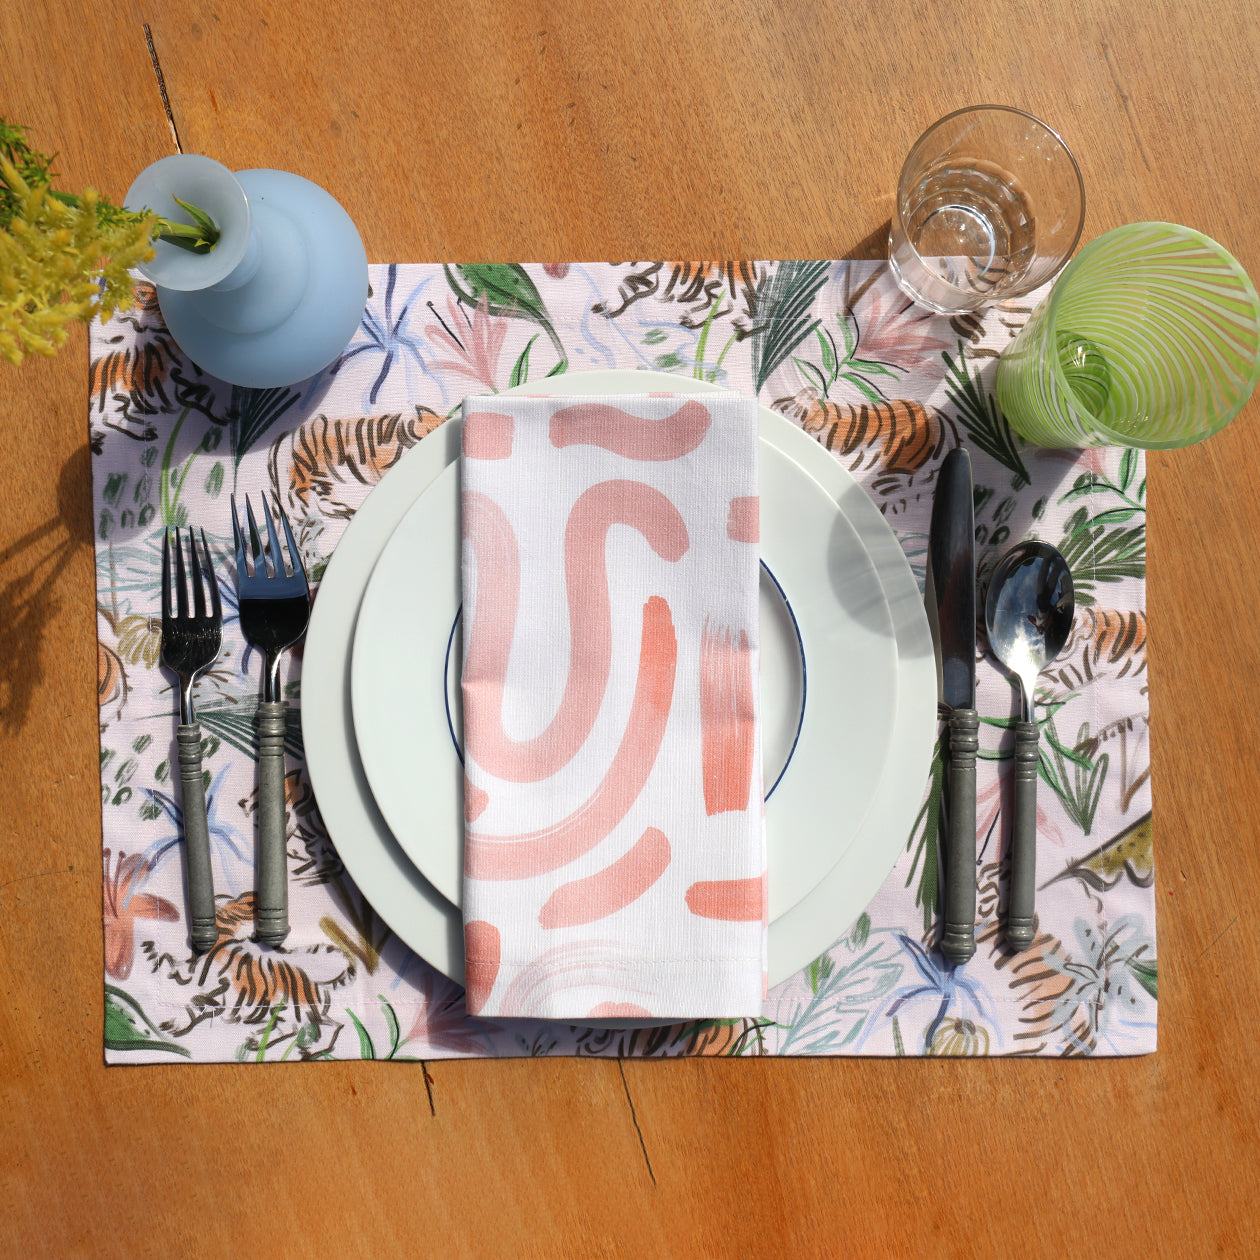 Close-up of table setting styled with Pink Chinoiserie Tiger Printed Placemat under two white plates with Pink Graphic Printed Napkin on top by silverware and two glass cups next to blue vase with flowers